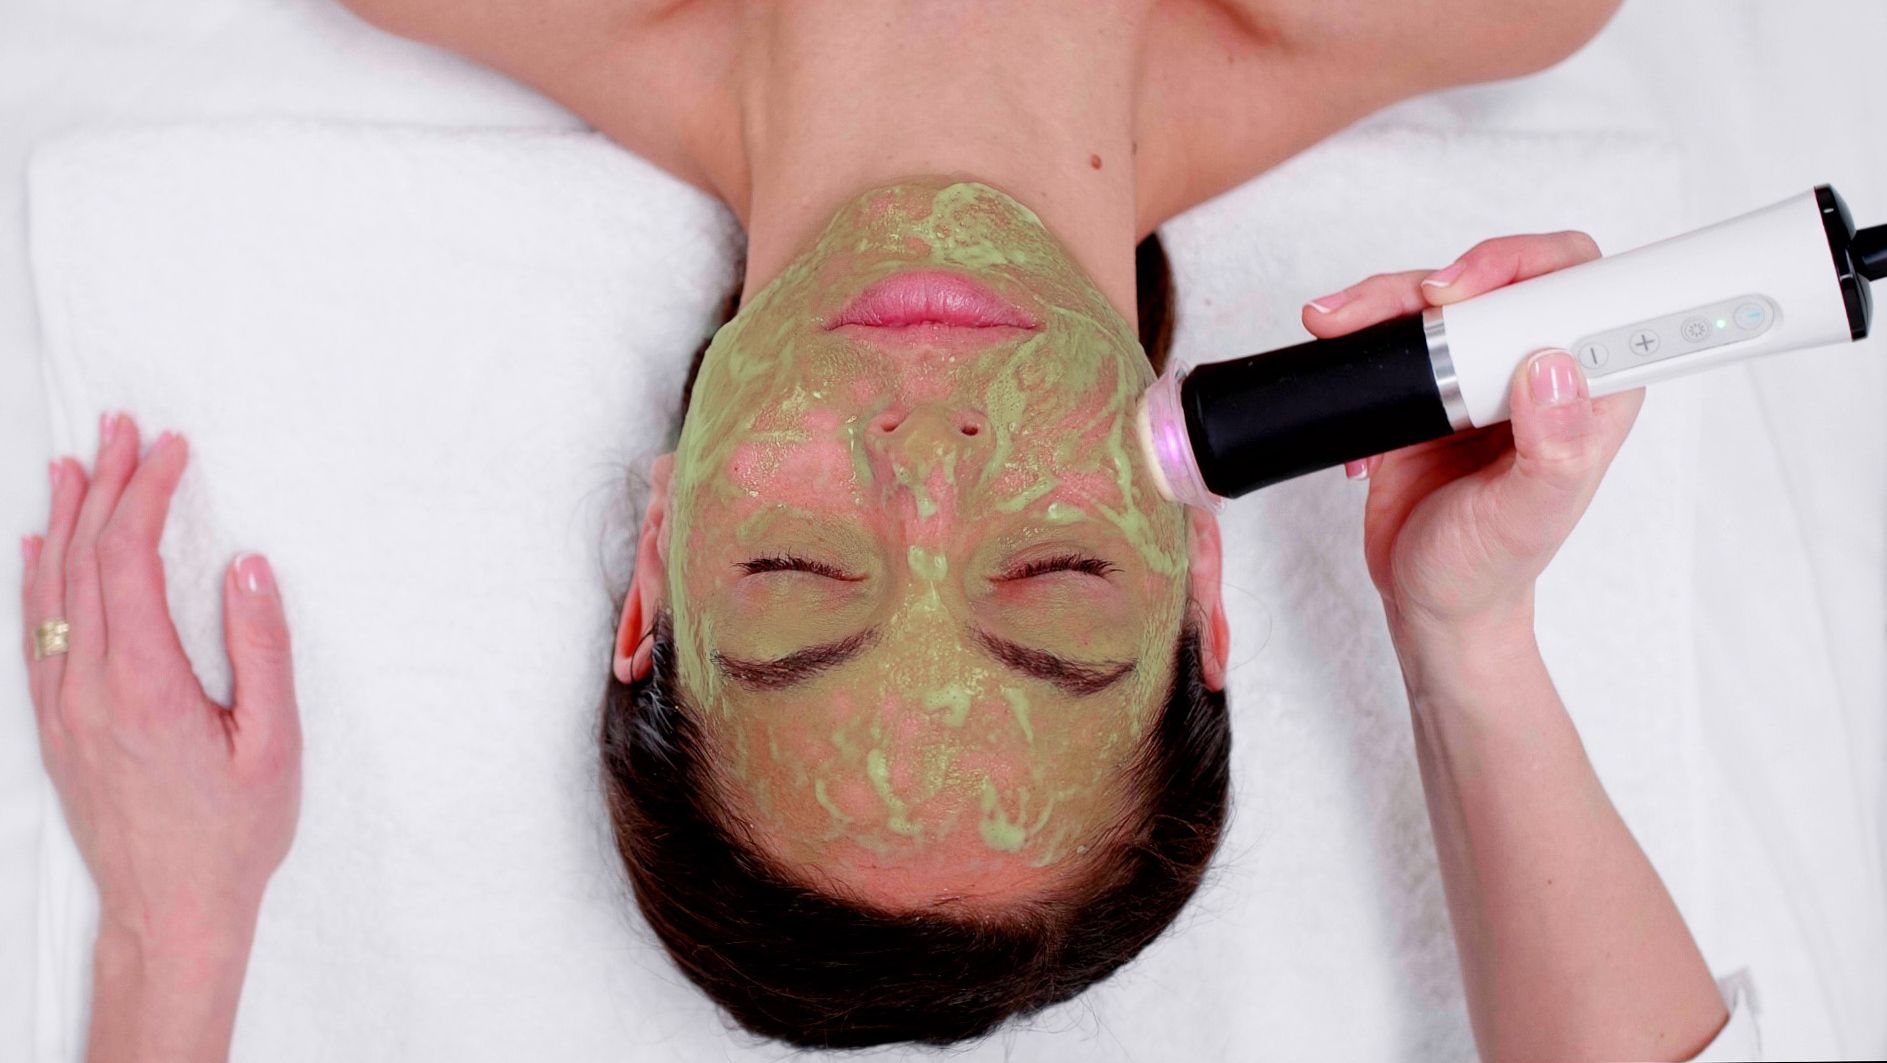 Glo2 Retouch facial at Lush Aesthetics Georgetown KY